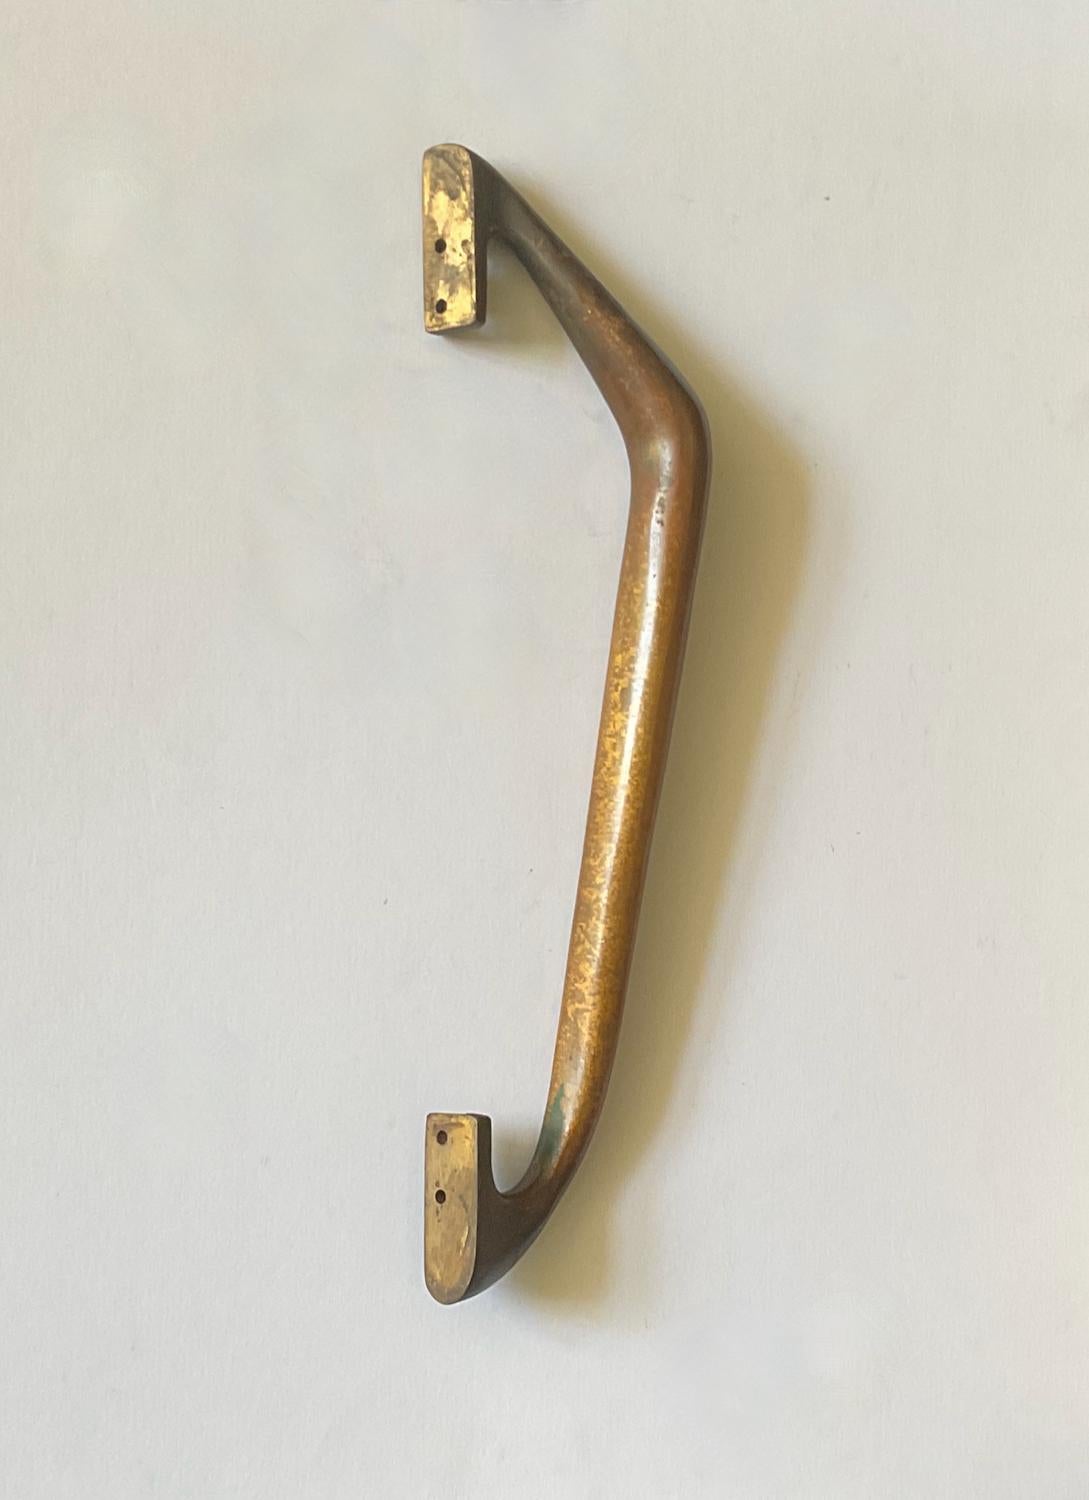 Long Push or Pull Door Handle in Solid Bronze, European, Mid-20th Century For Sale 1